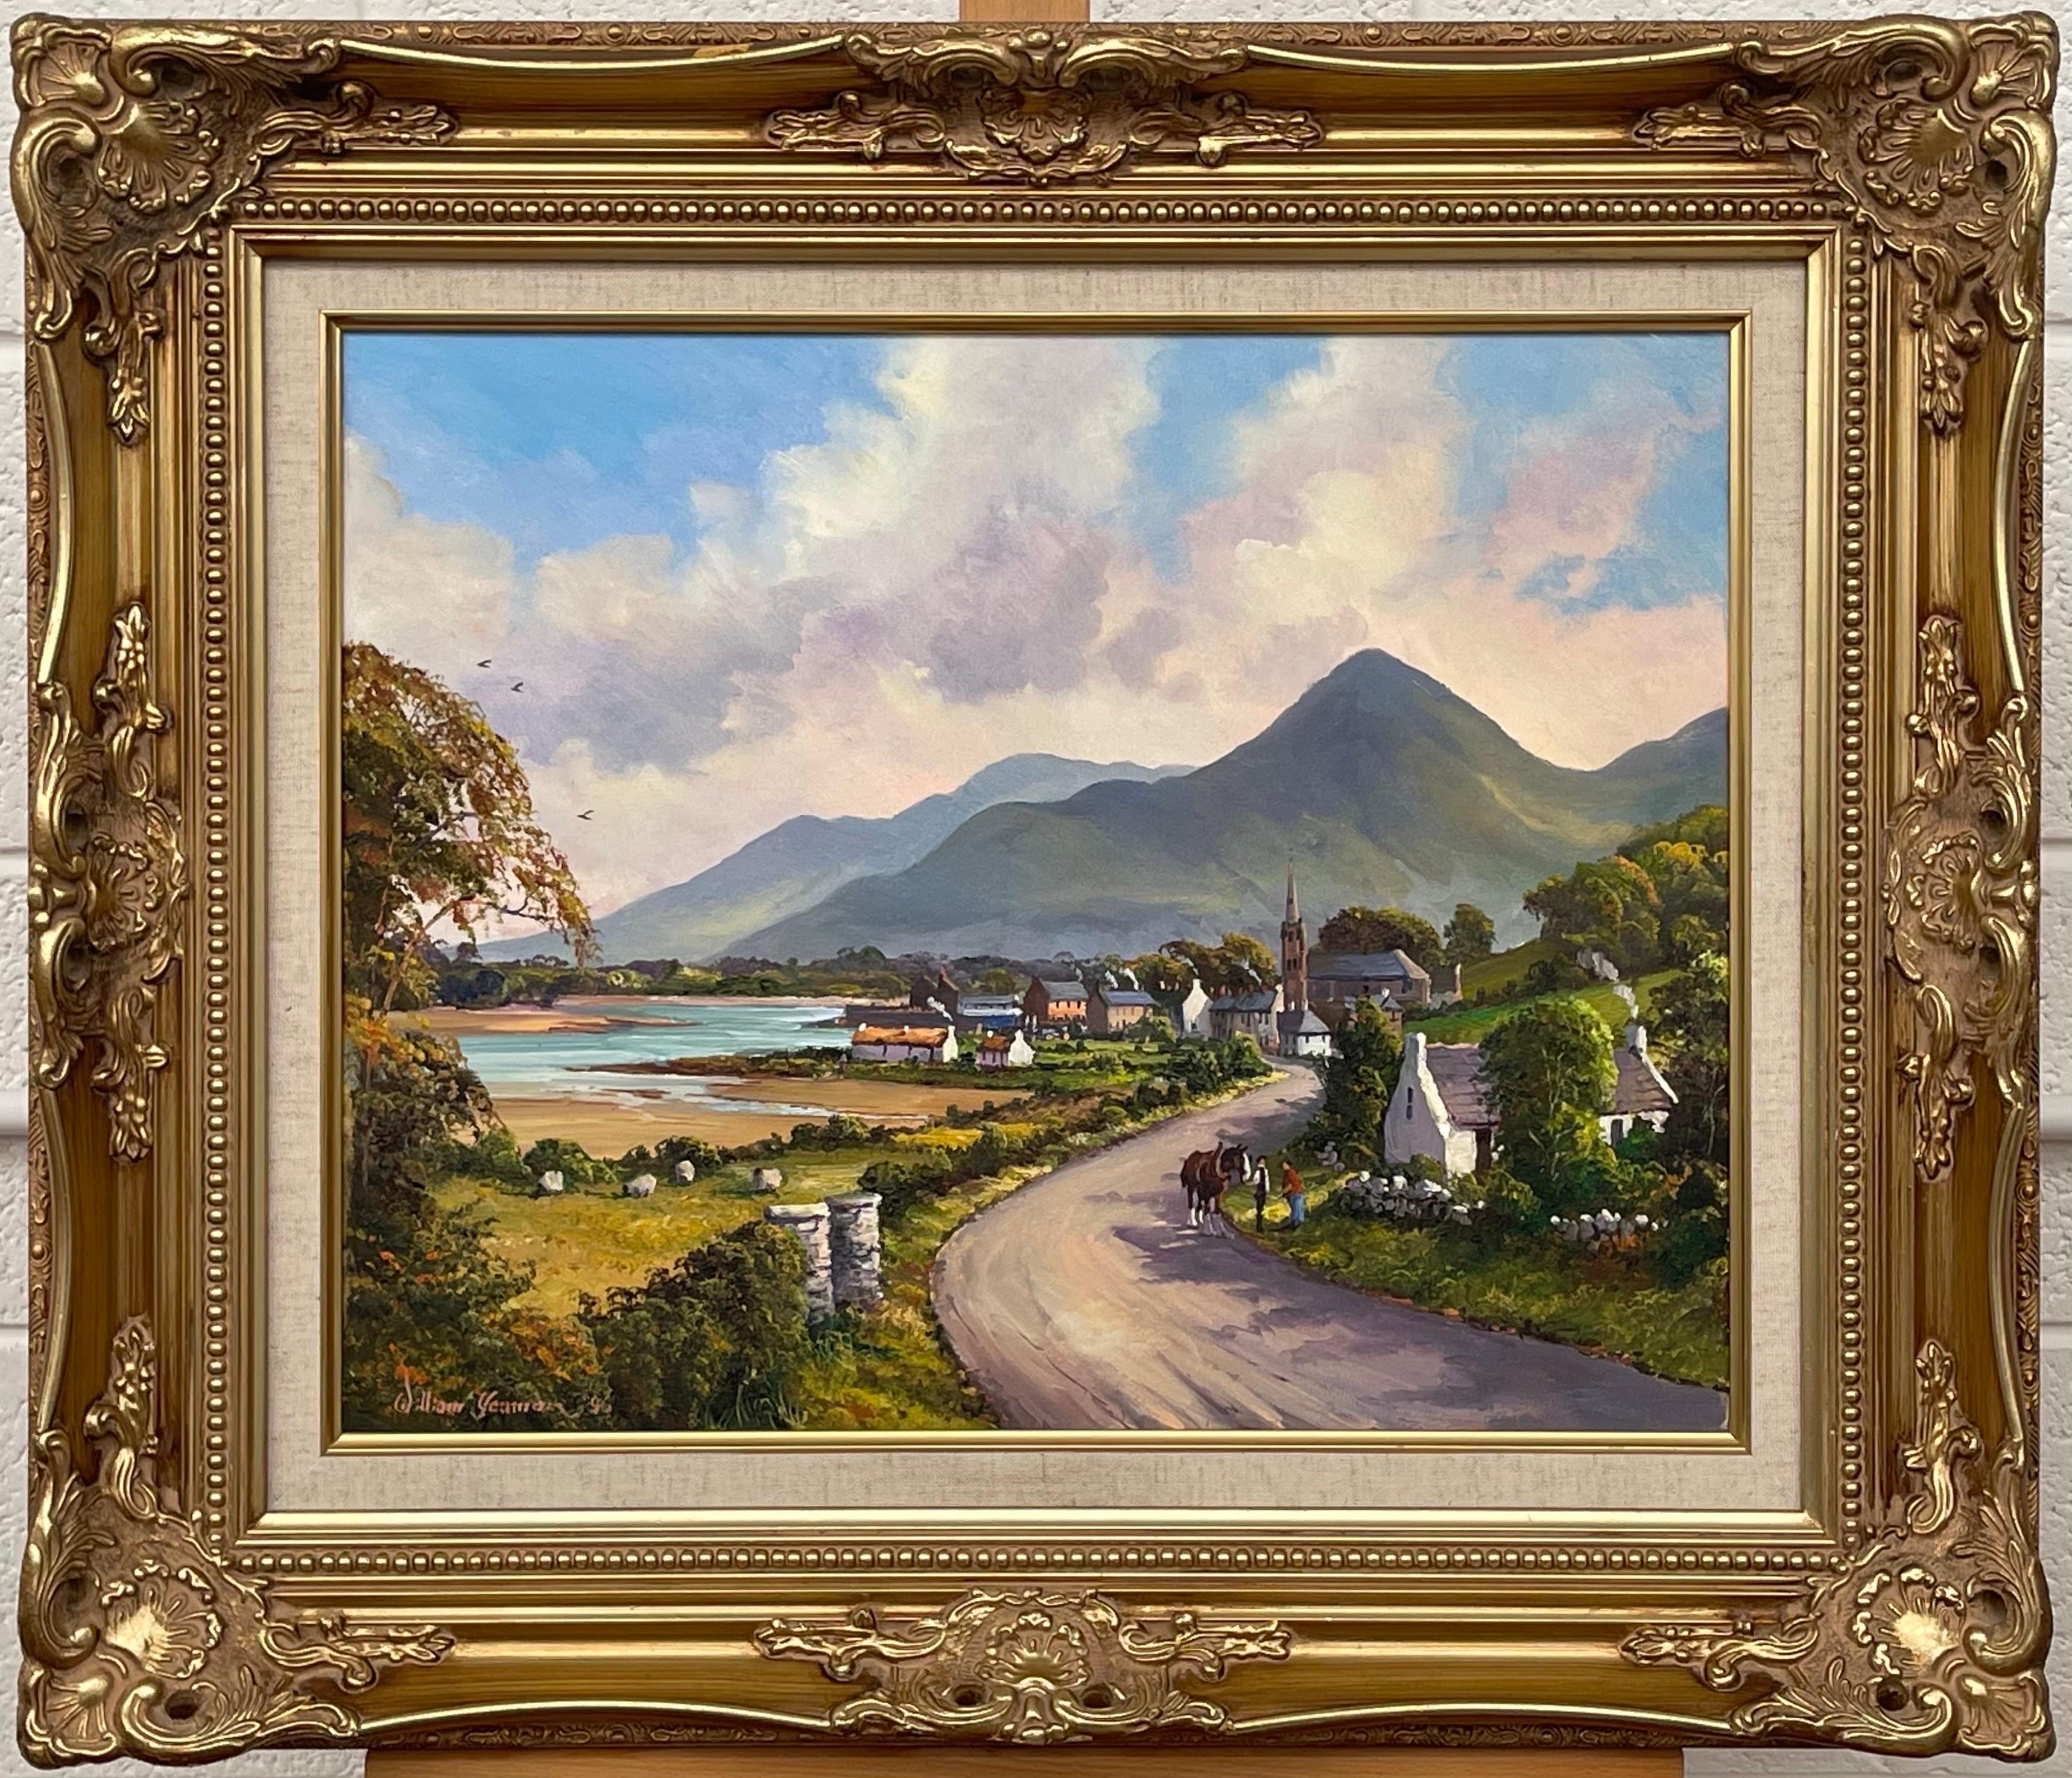 William Yeaman Figurative Painting - Figures on the road to Dundrum Ireland in the Irish Mountain Landscape